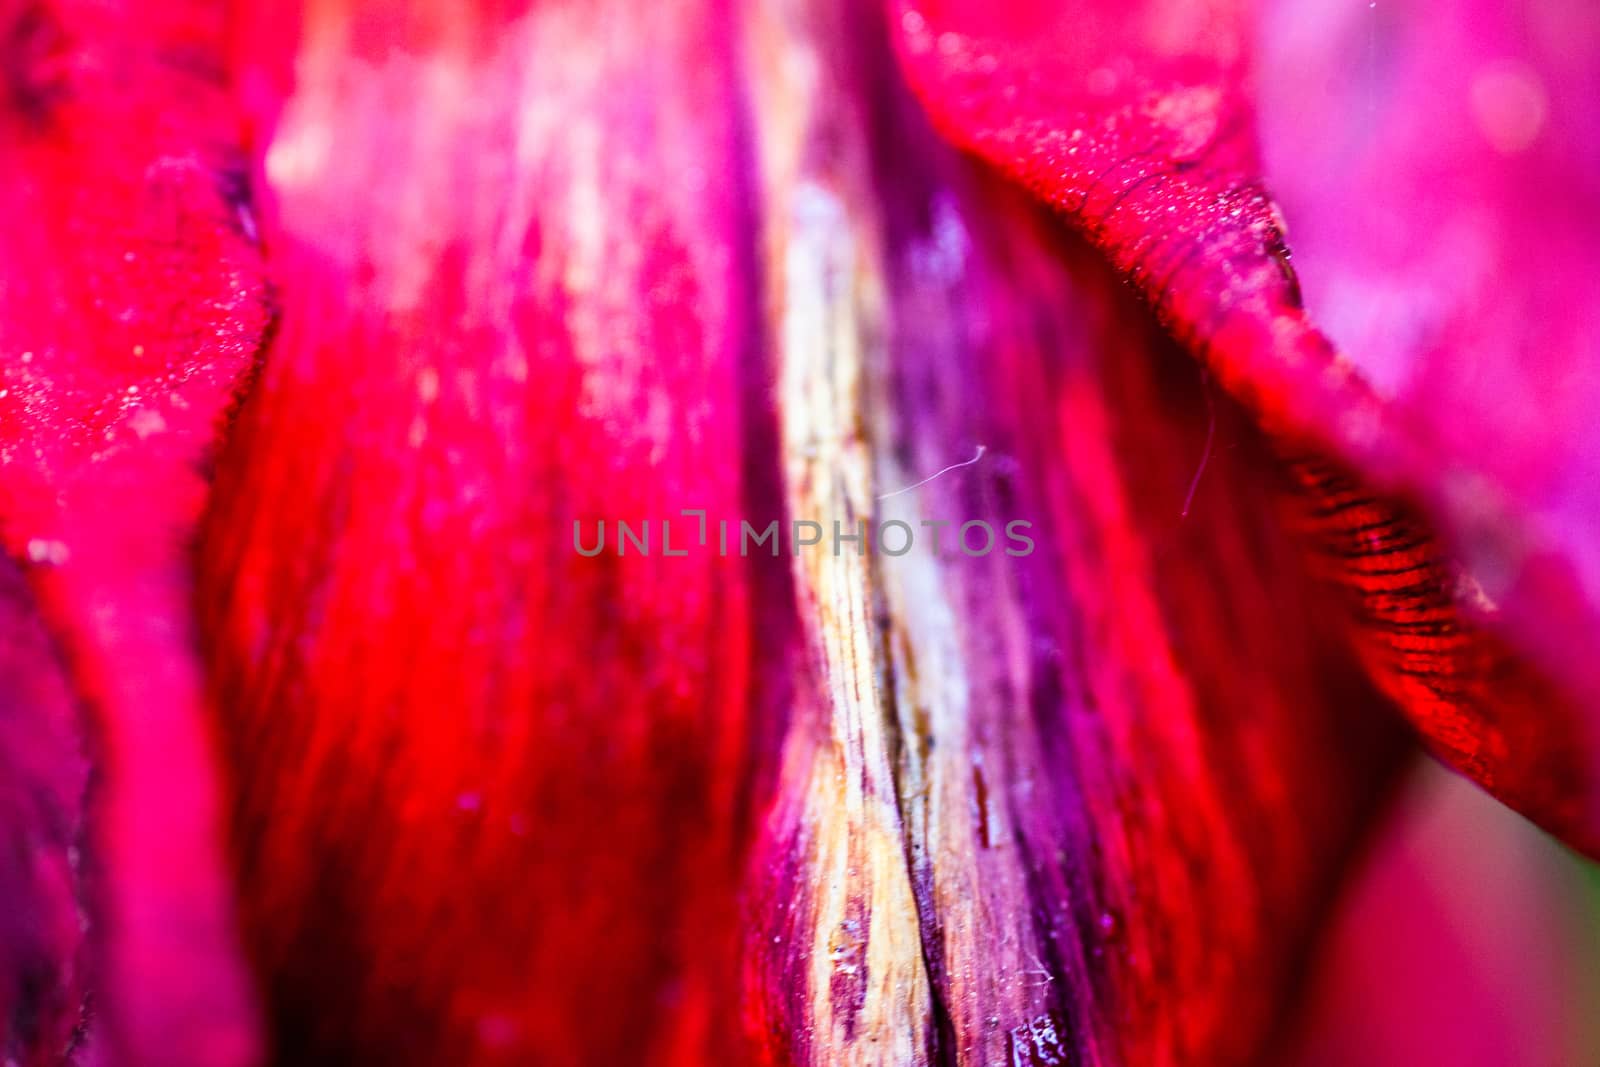 Closeup of the fading petals of the red-pink tulip flower.